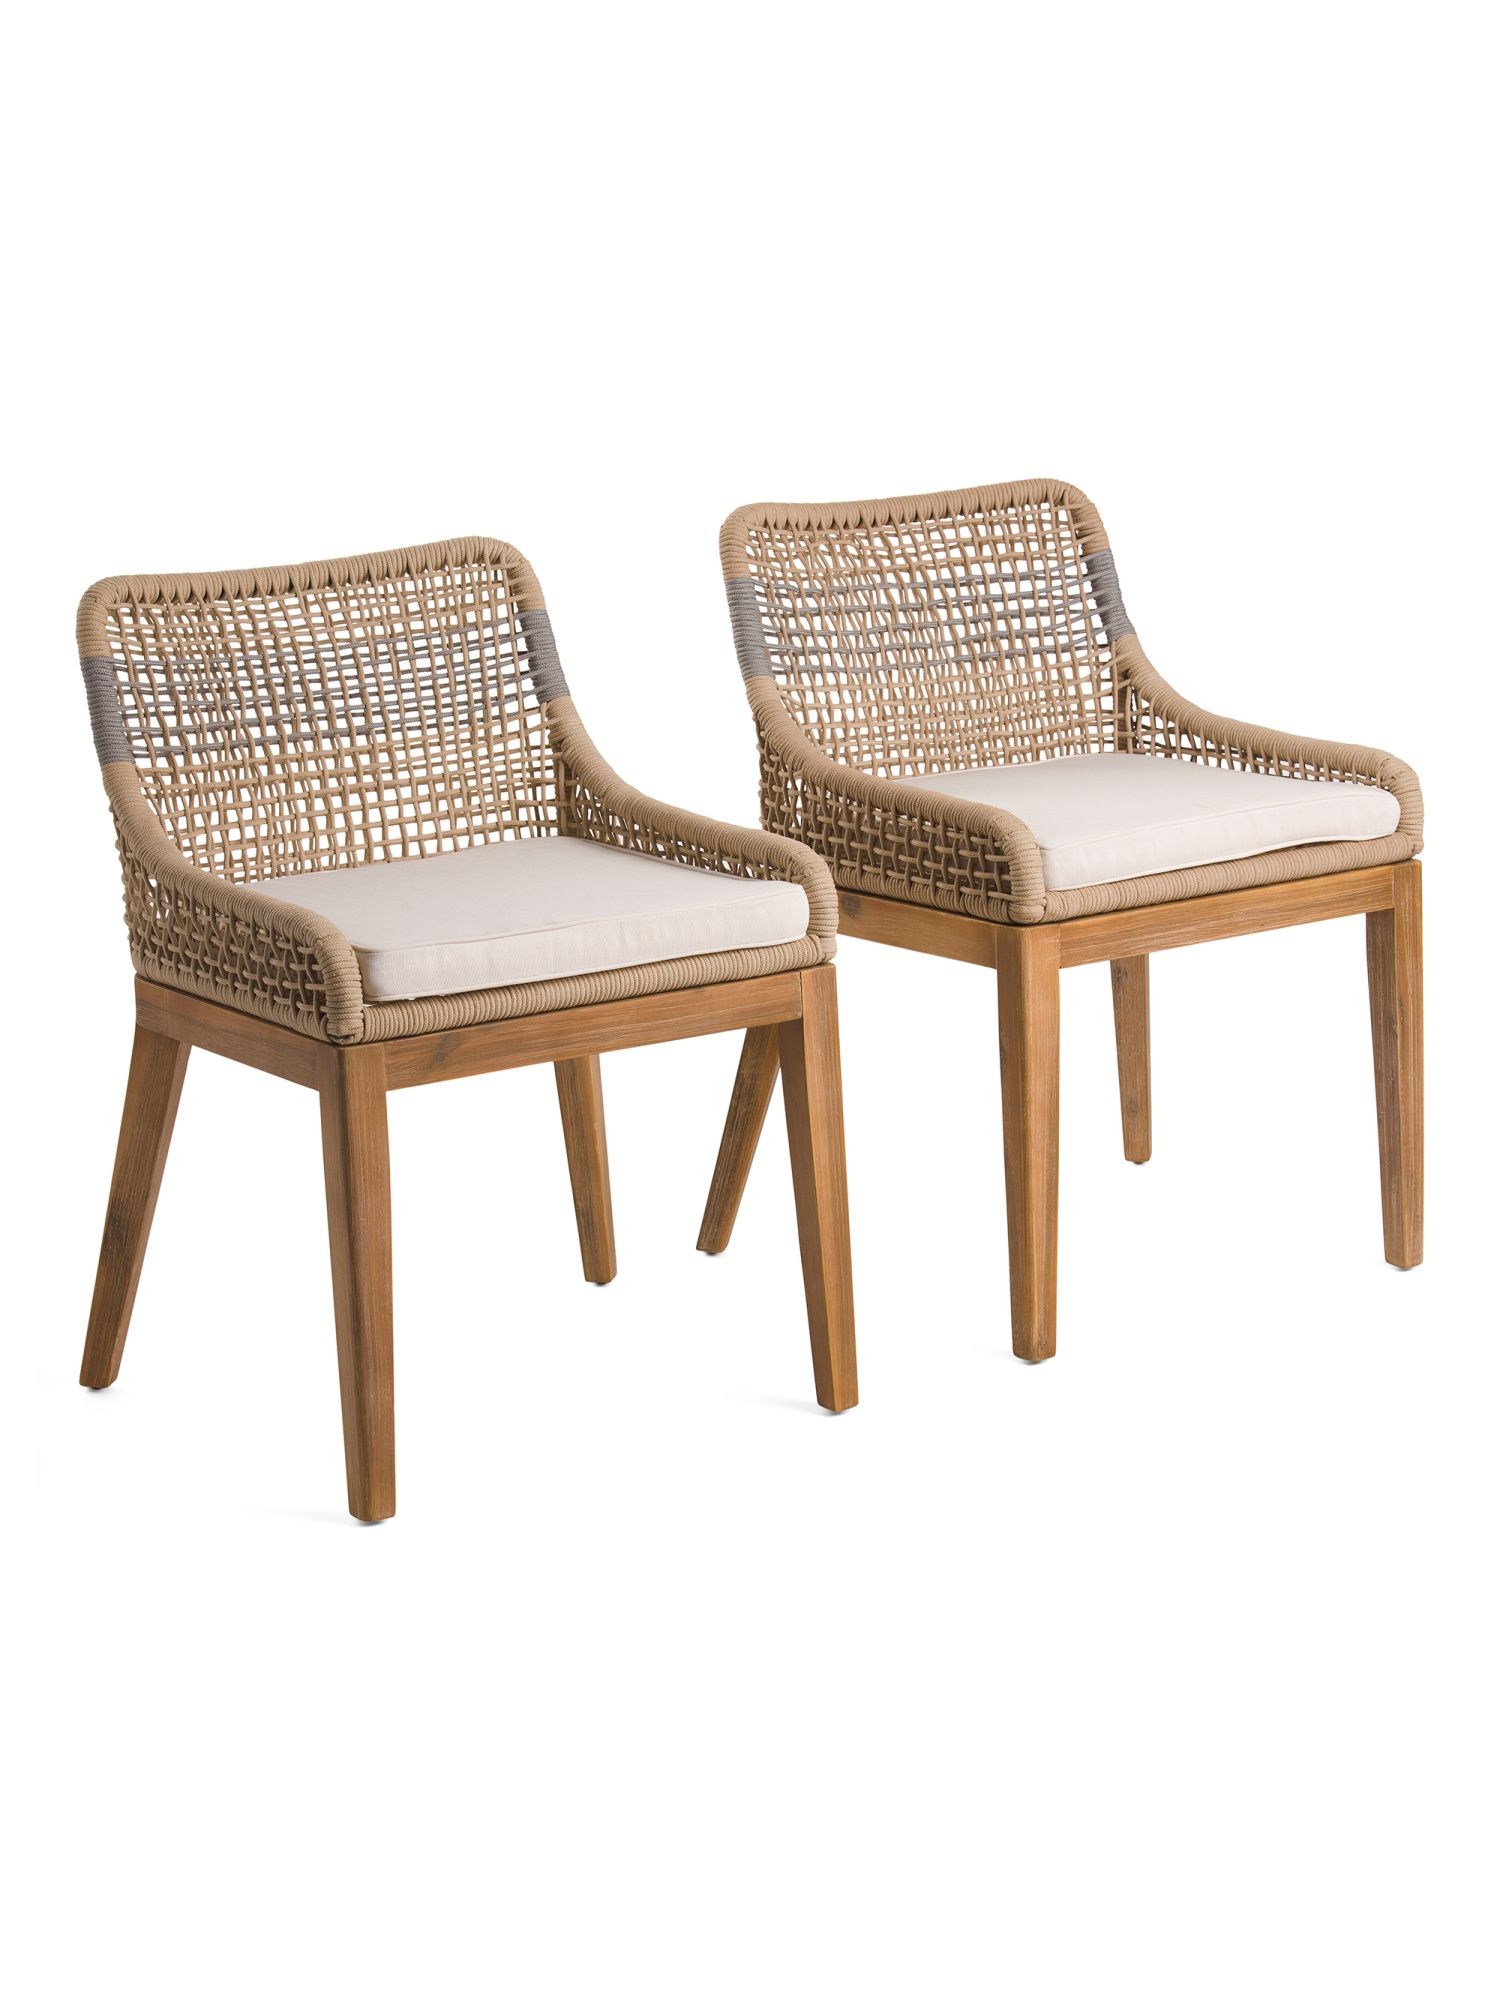 Set Of 2 Woven Stripe Dining Rope Chairs | Kitchen & Dining Room | Marshalls | Marshalls